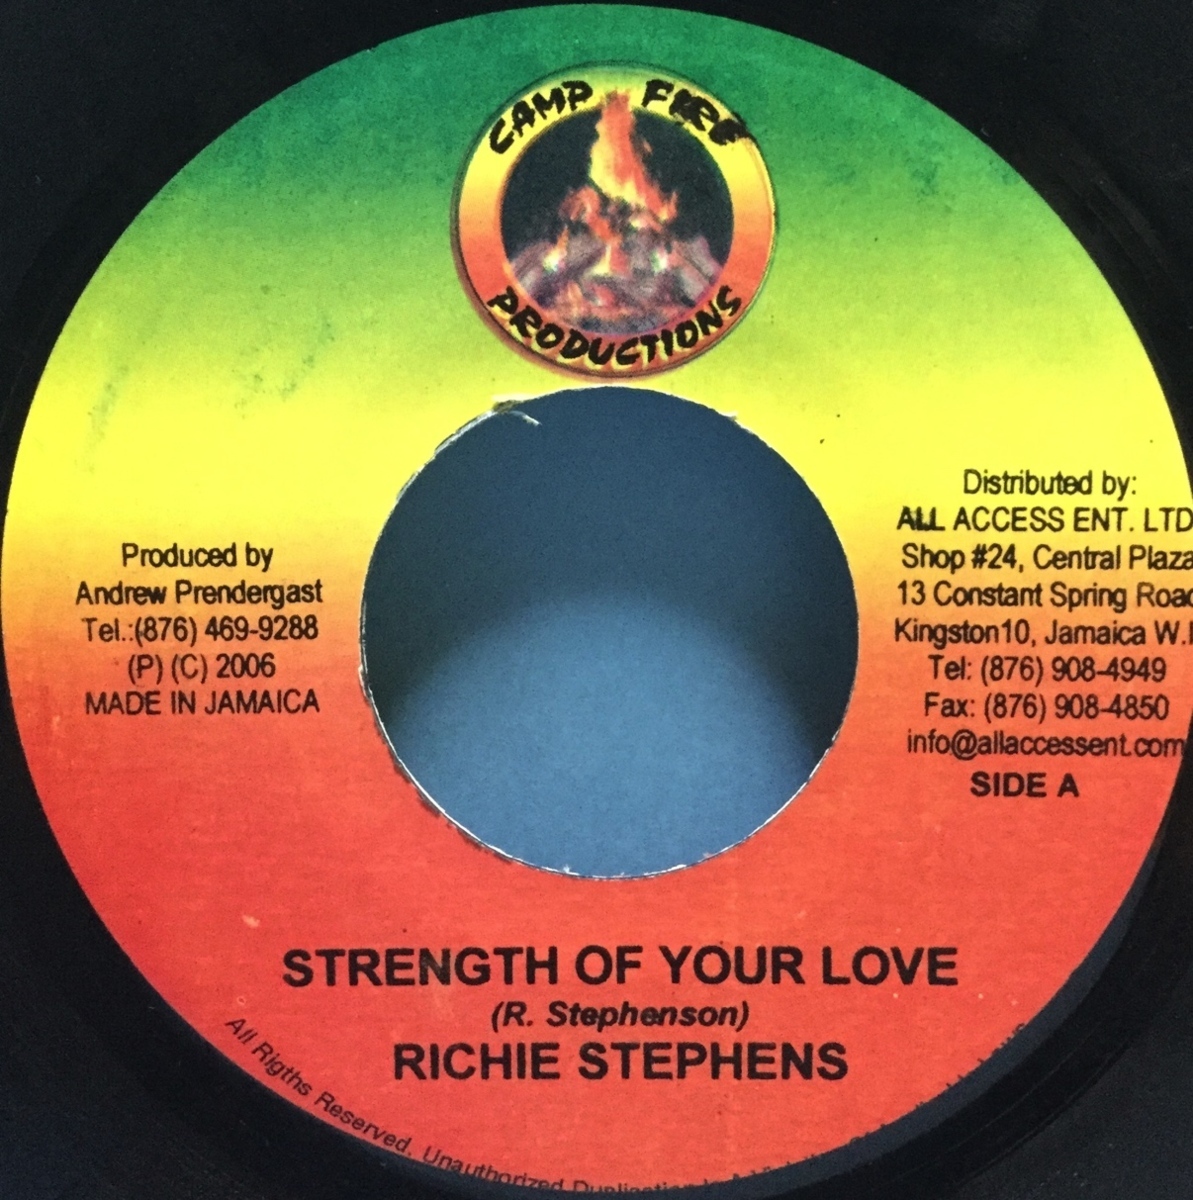 EP 洋楽 Richie Stephens / Strength Of Your Love 輸入盤_画像2